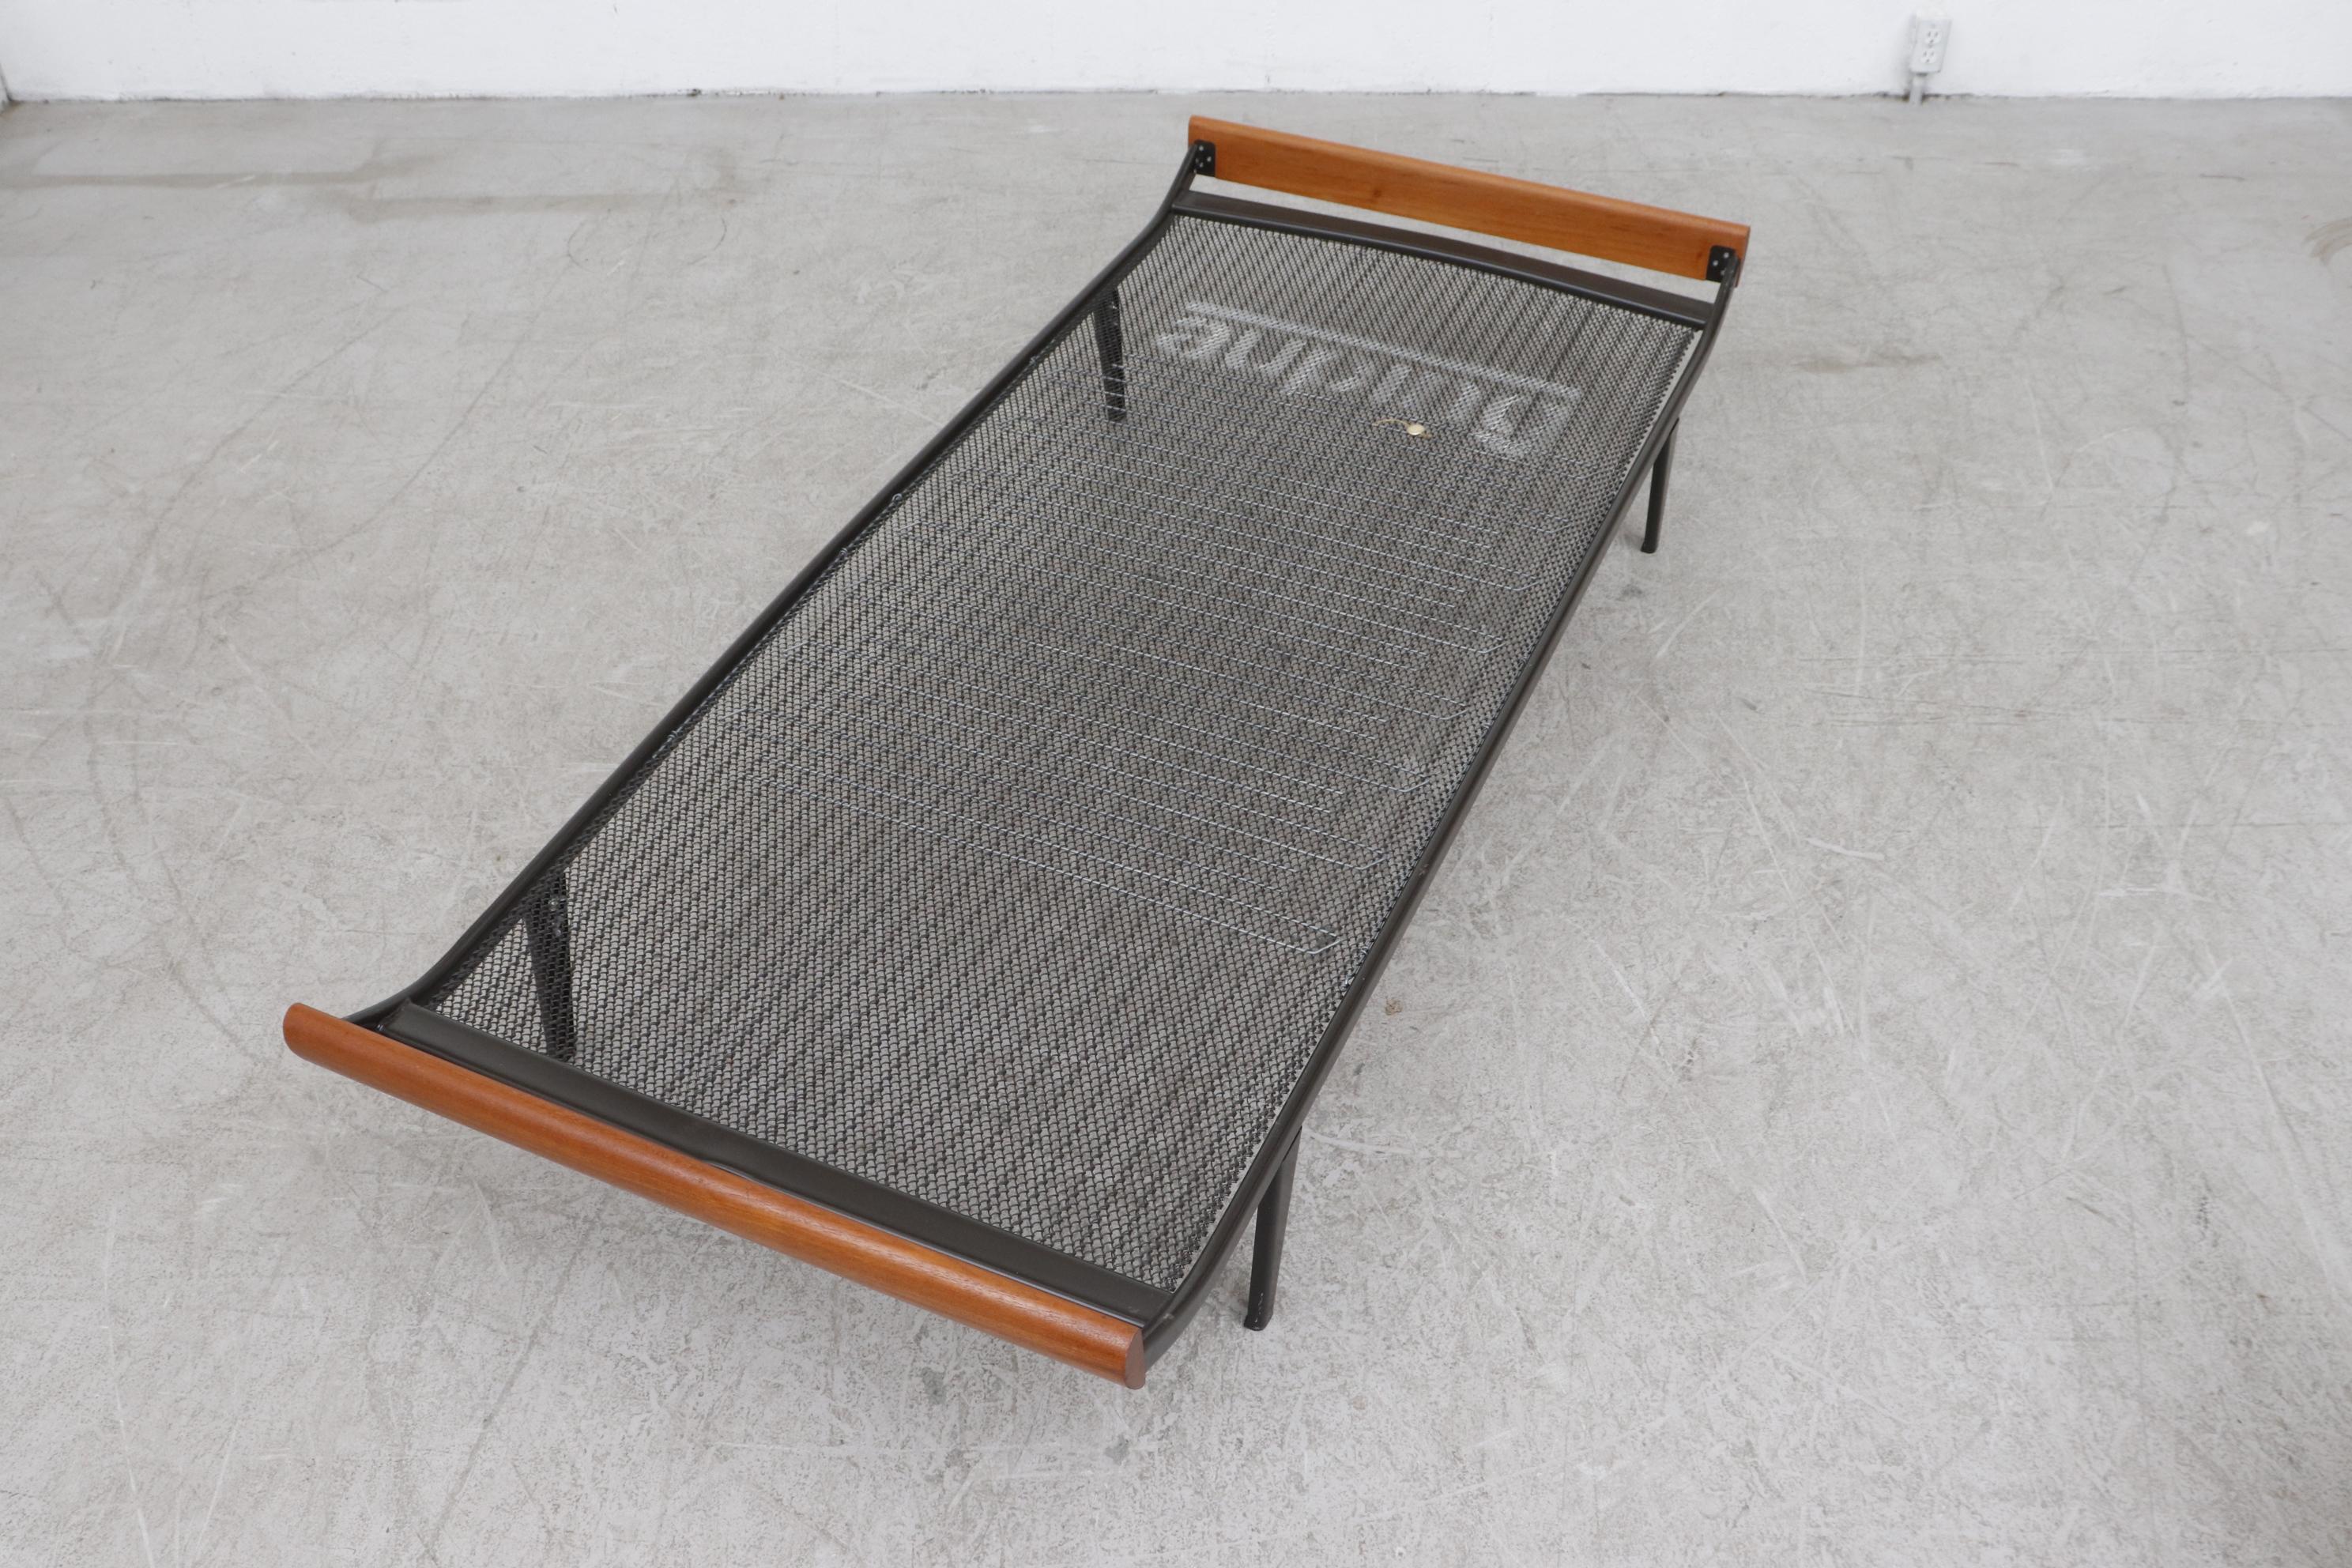 1960s Cleopatra daybed by A.R. Cordemeyer. With new indigo upholstered mattress, matching bolster, teak ends and dark brown enameled metal frame with 